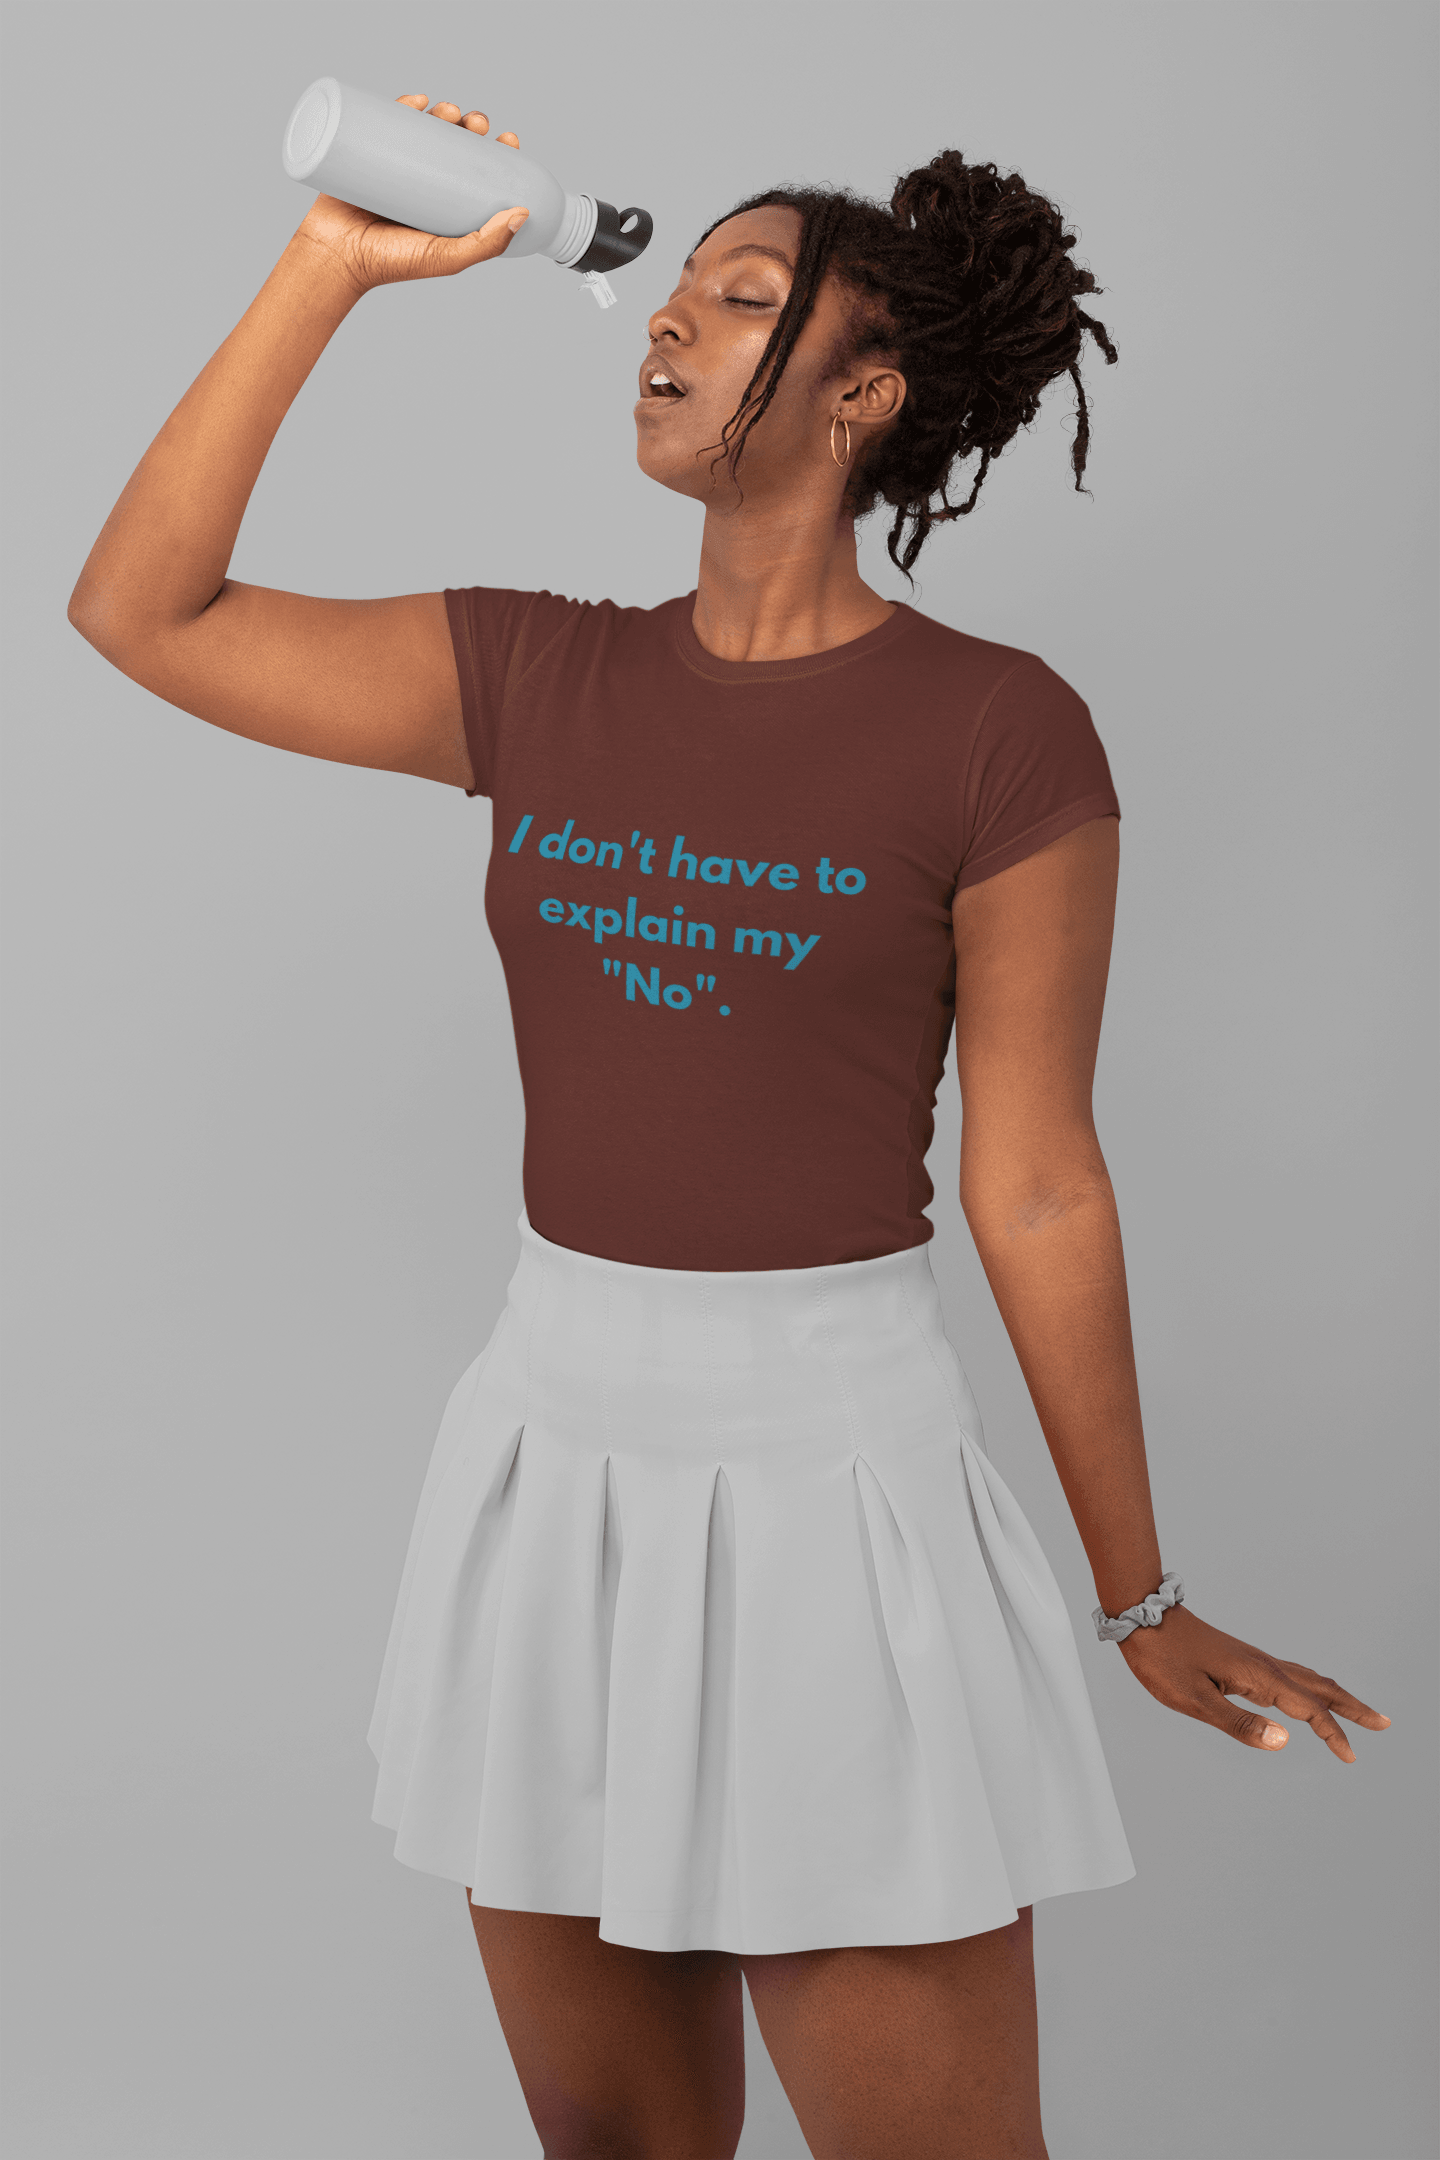 I Don't Have to Explain My "No" Tee - Sharp Tact Kreativ | Tees & Gifts with Encouraging Messages to Brighten Your Day with a Bit of Wit